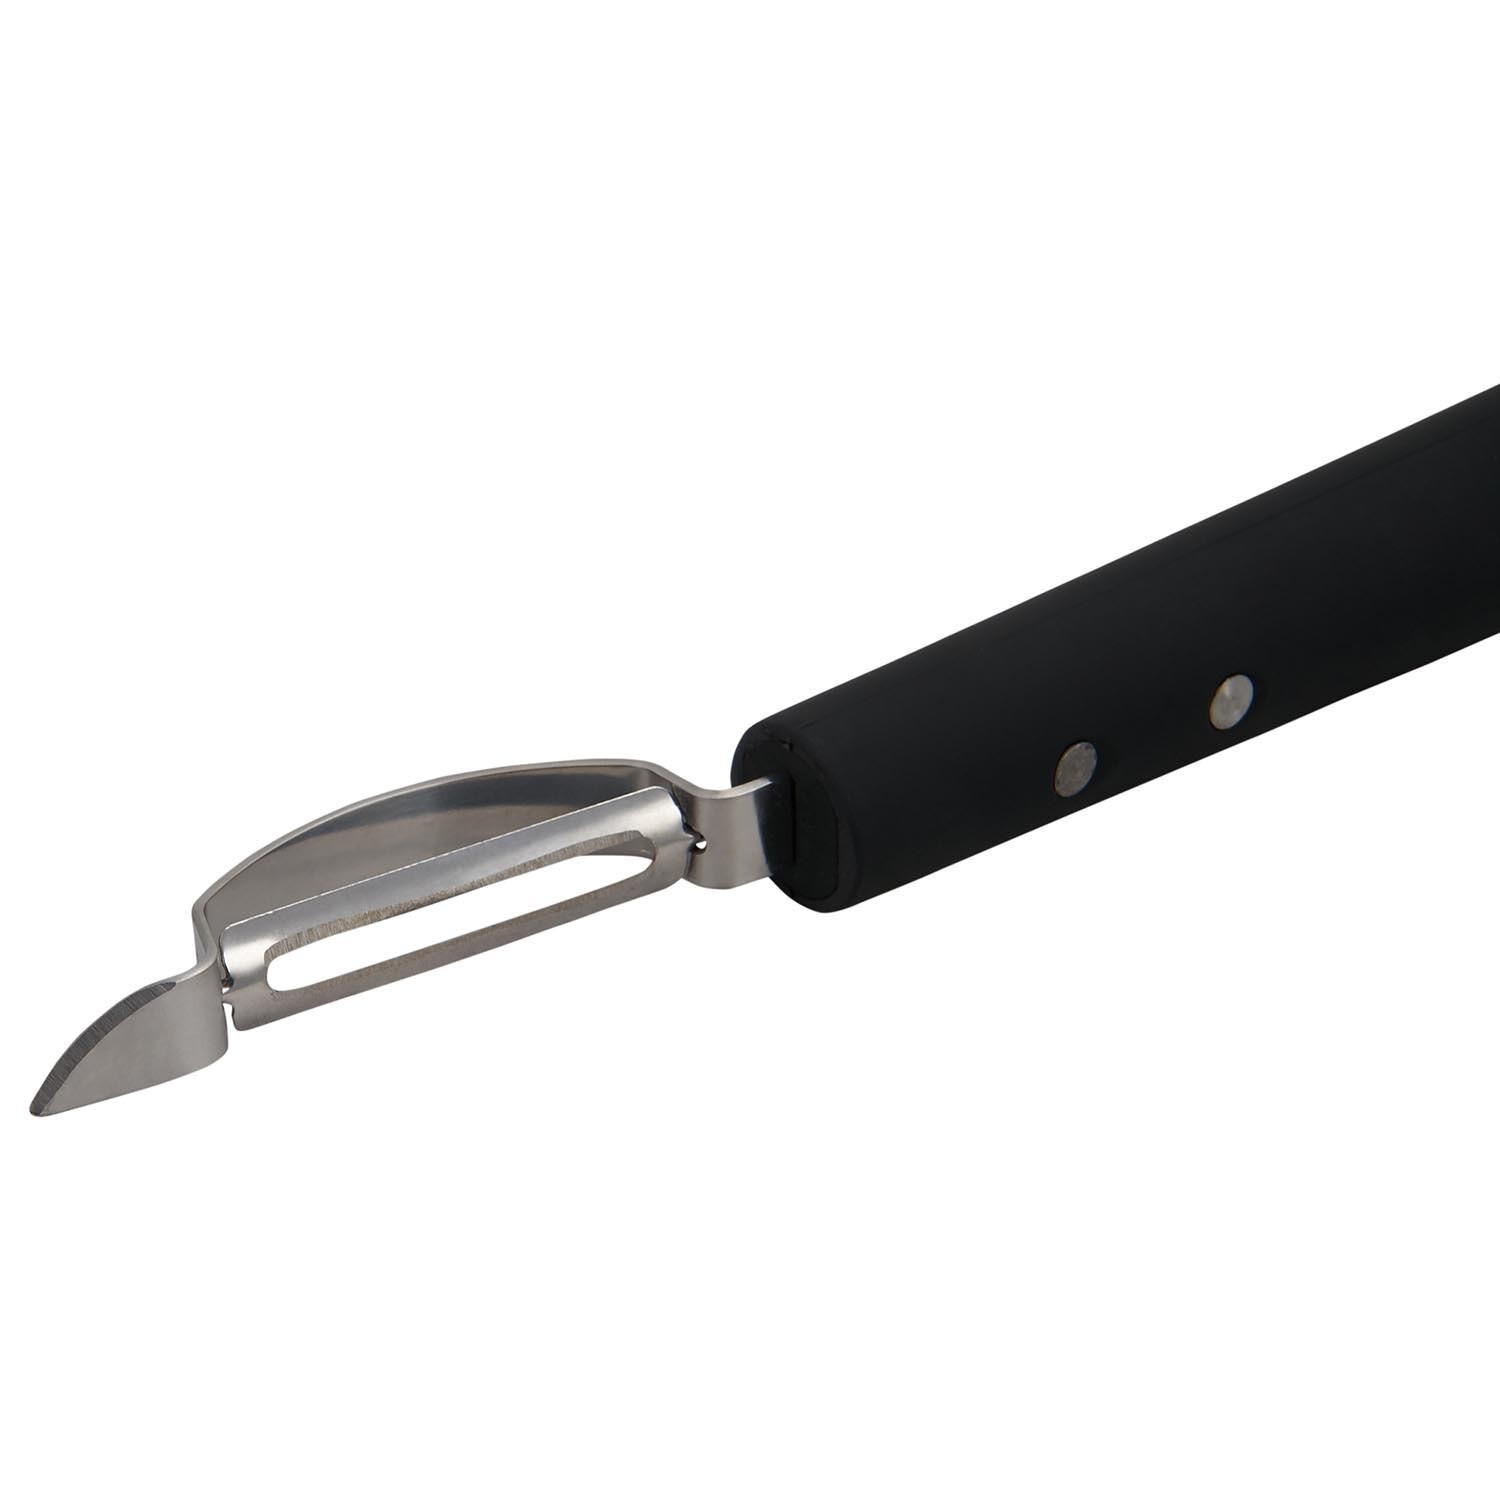 Kitchenmaster Peeler with Soft Touch Handle - Black Image 3